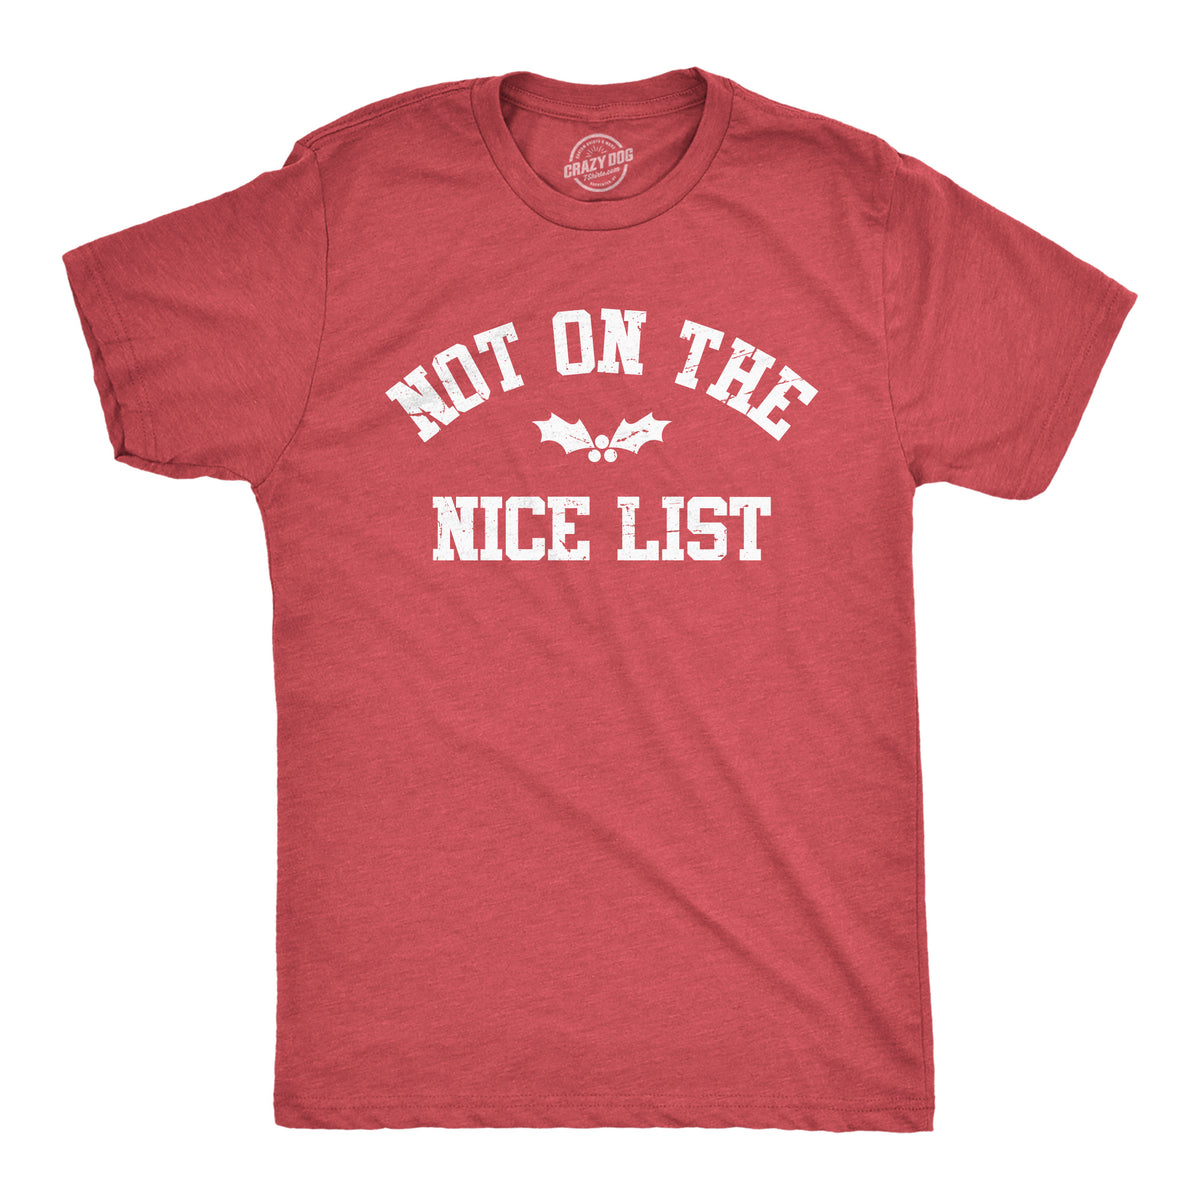 Funny Heather Red - NICELIST Not On The Nice List Mens T Shirt Nerdy Christmas sarcastic Tee